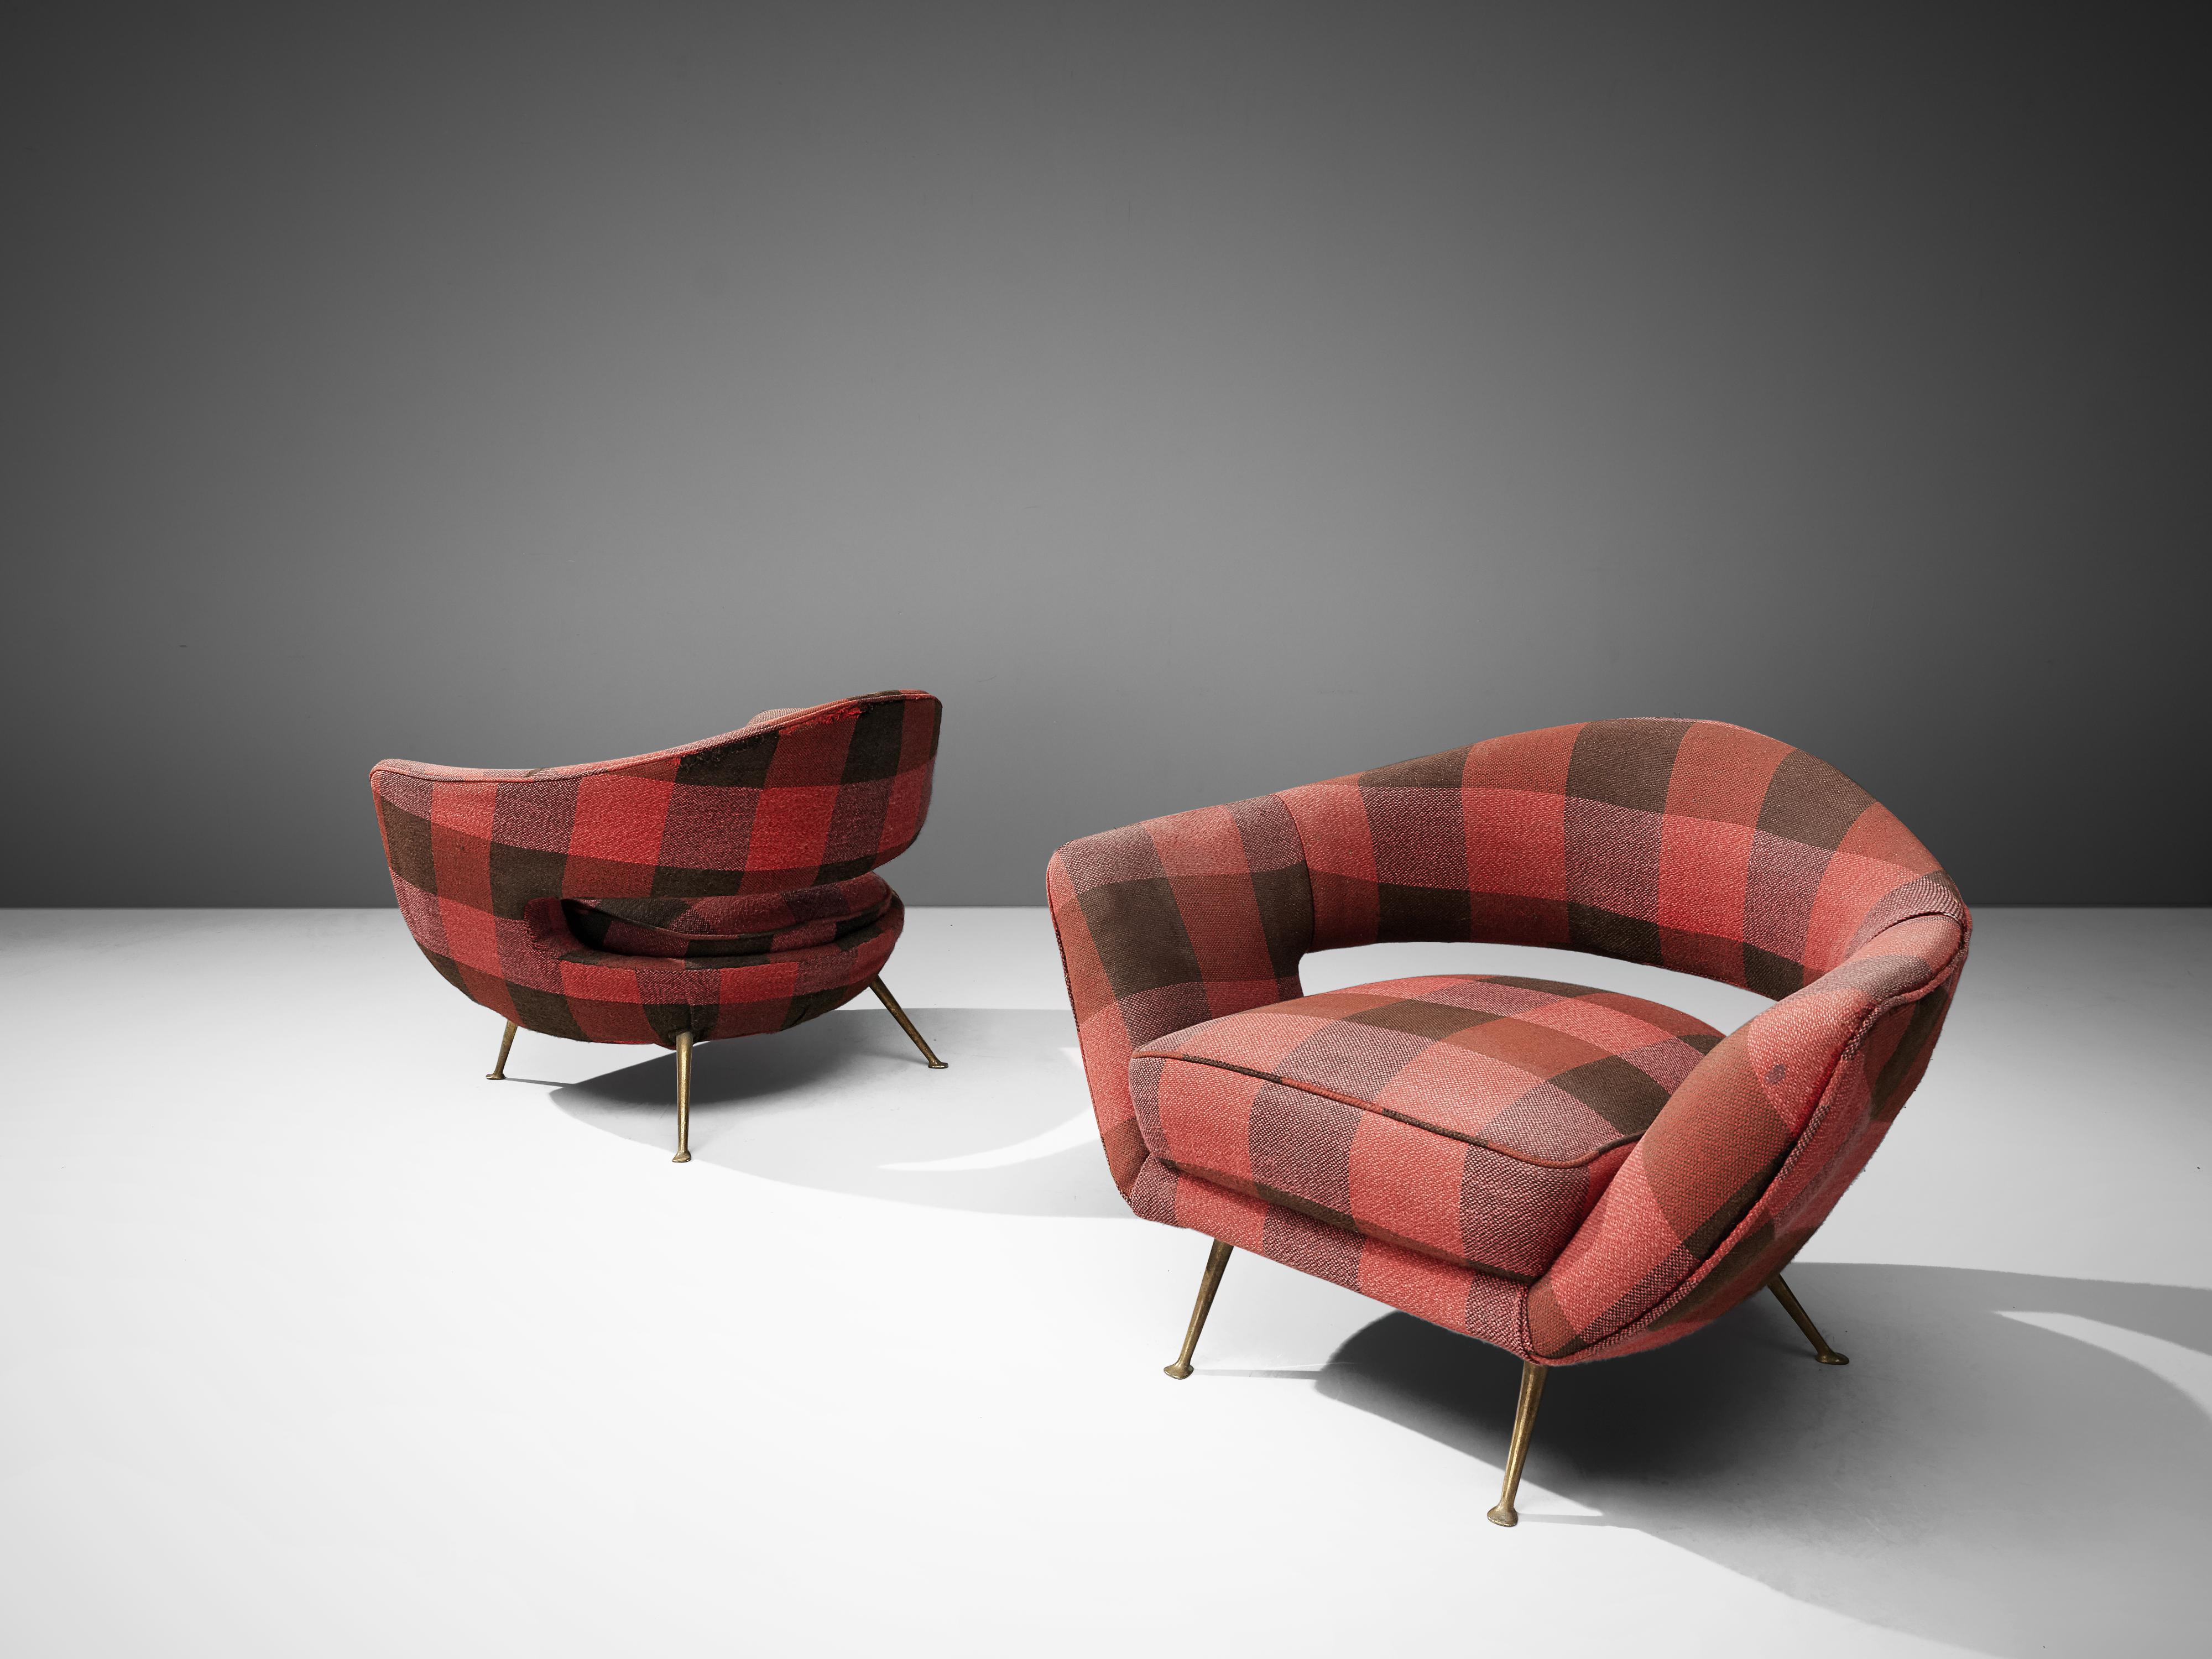 Set of lounge chairs, checkered upholstery, brass, Italy, 1960s

Thin brass legs hold and organic shaped lounge chair. With its round shape and the open space in the back the design seems to be light and airy although the high seating cushion offers